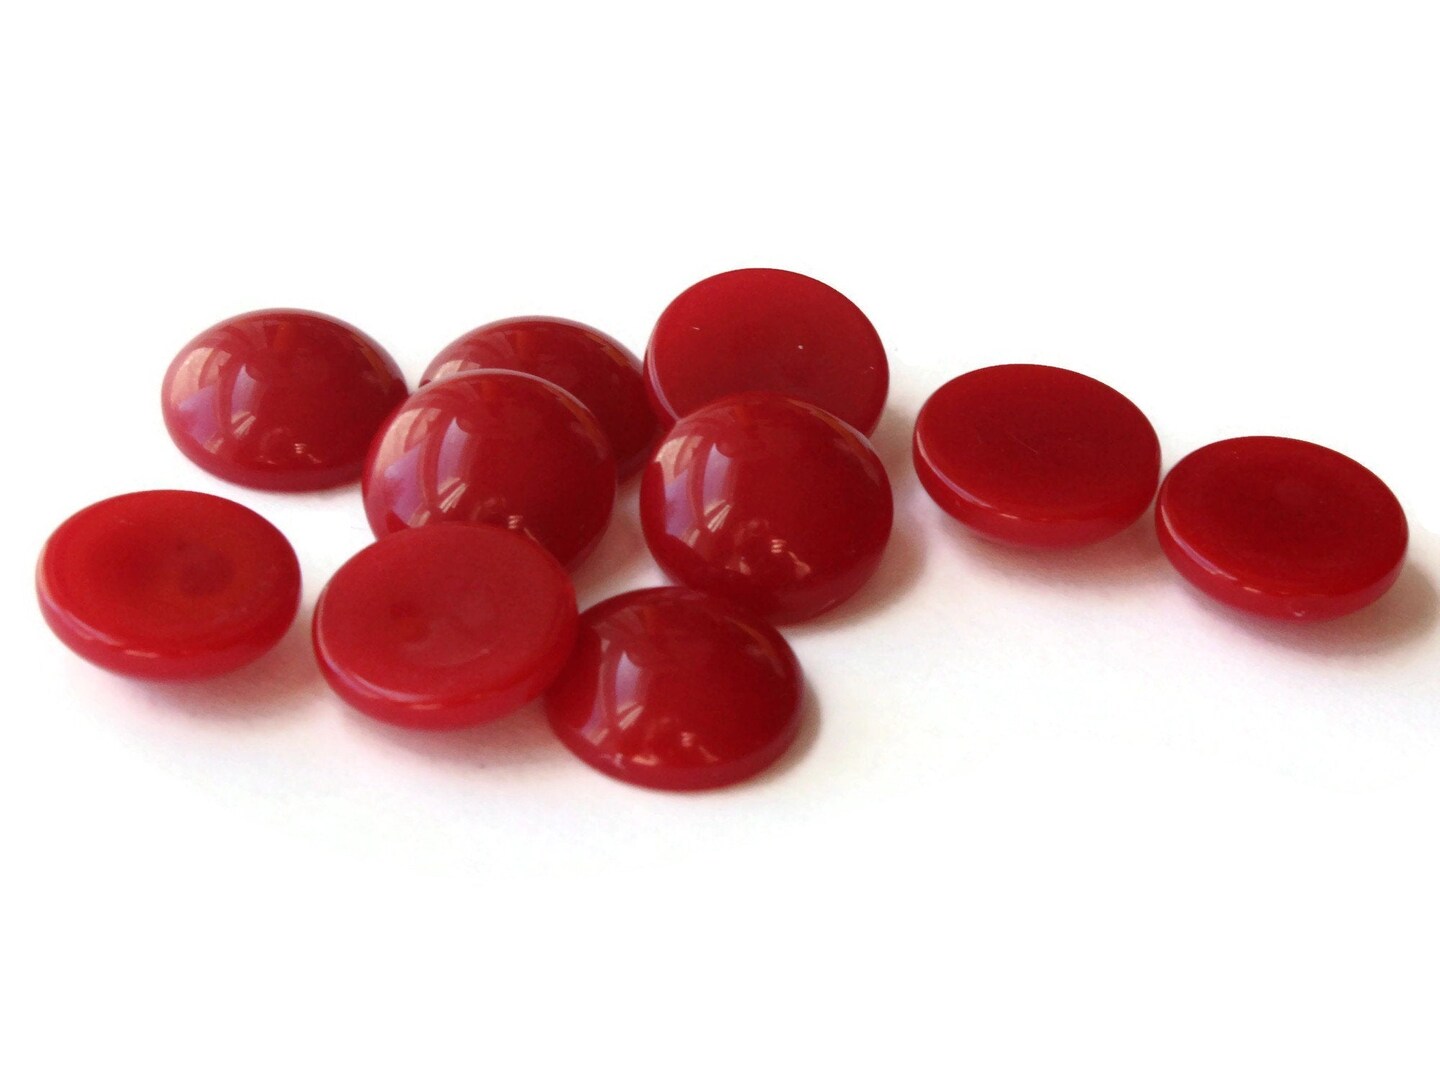 10 13mm Round Dark Red Cabochons Vintage Japanese Lucite Cabochons Plastic Cabochons